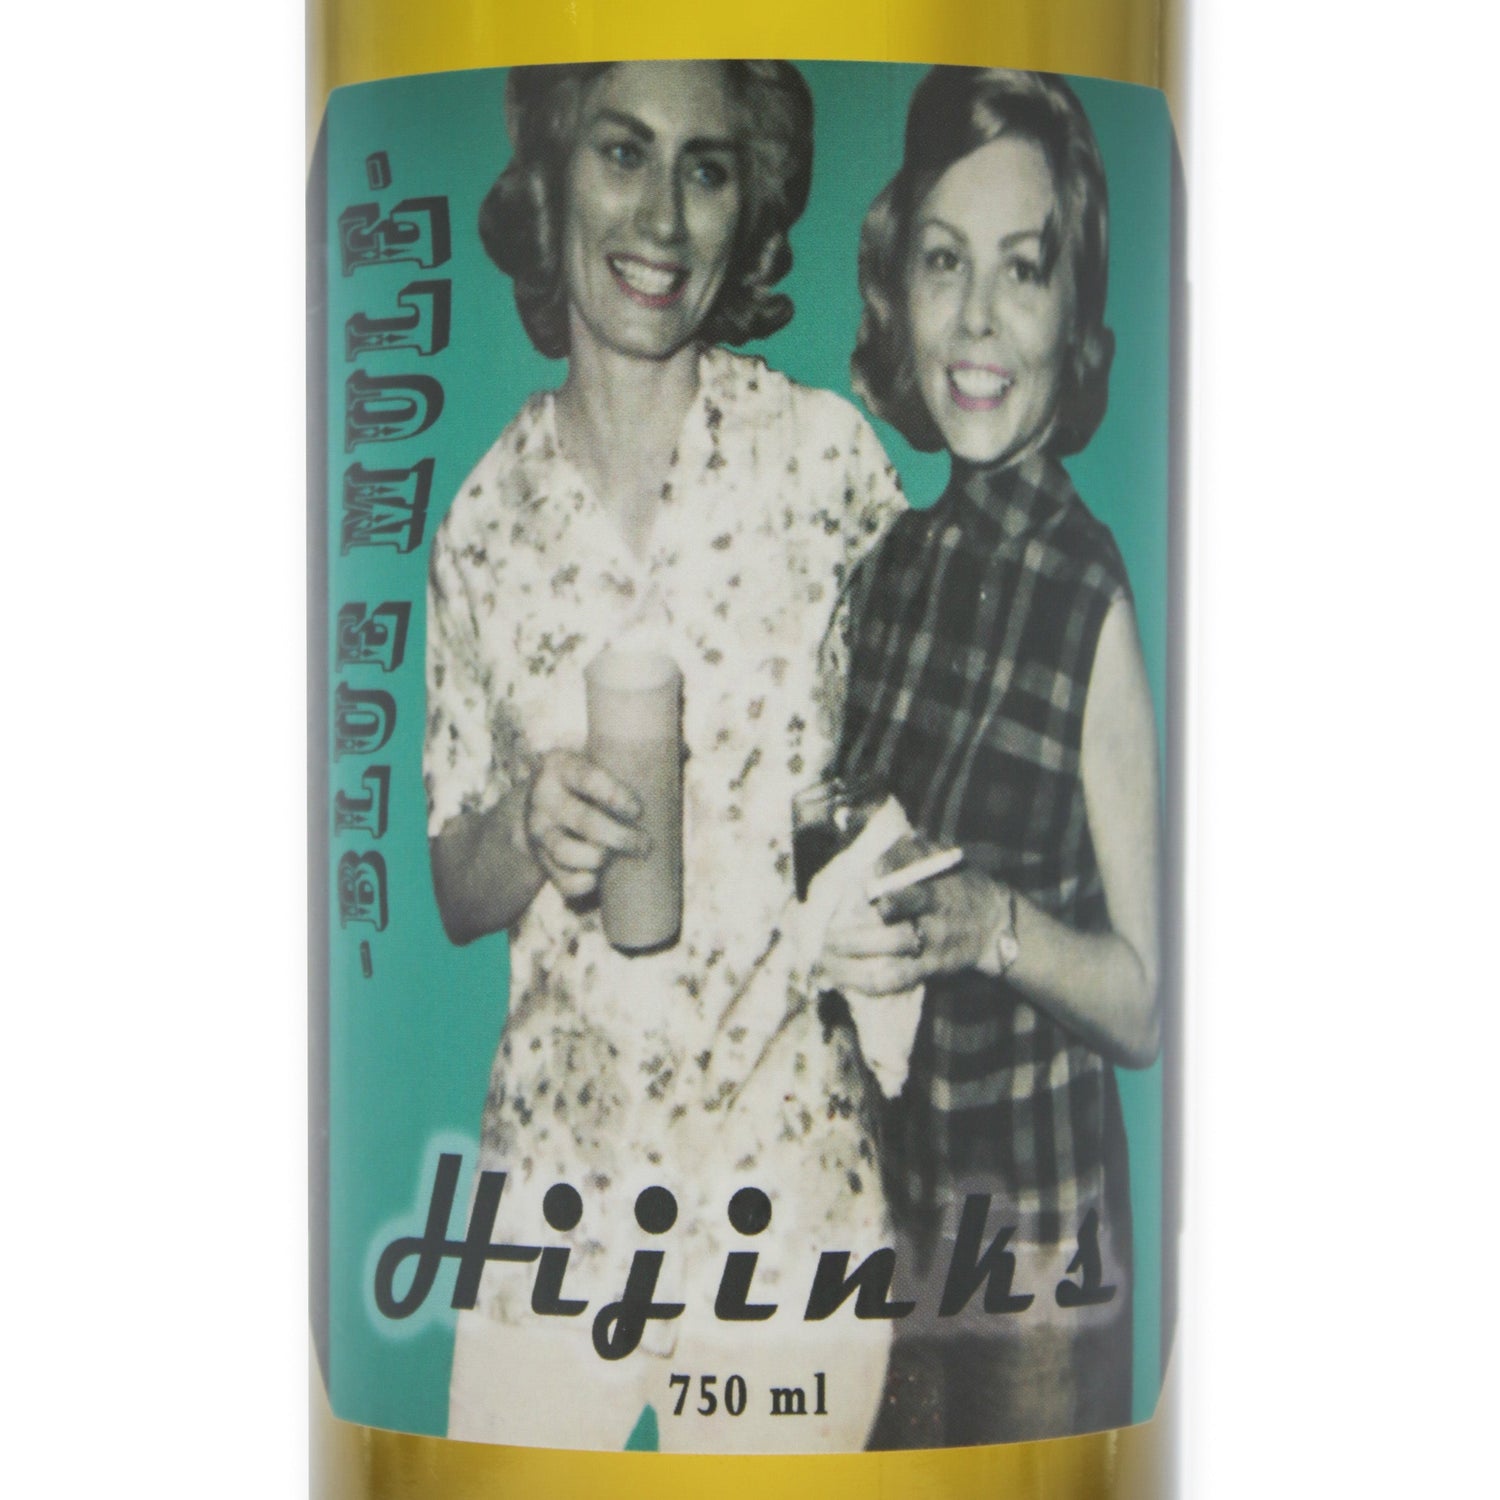 In Store Pickup Or Local Delivery Only: Blue Mule Winery Hijinks White